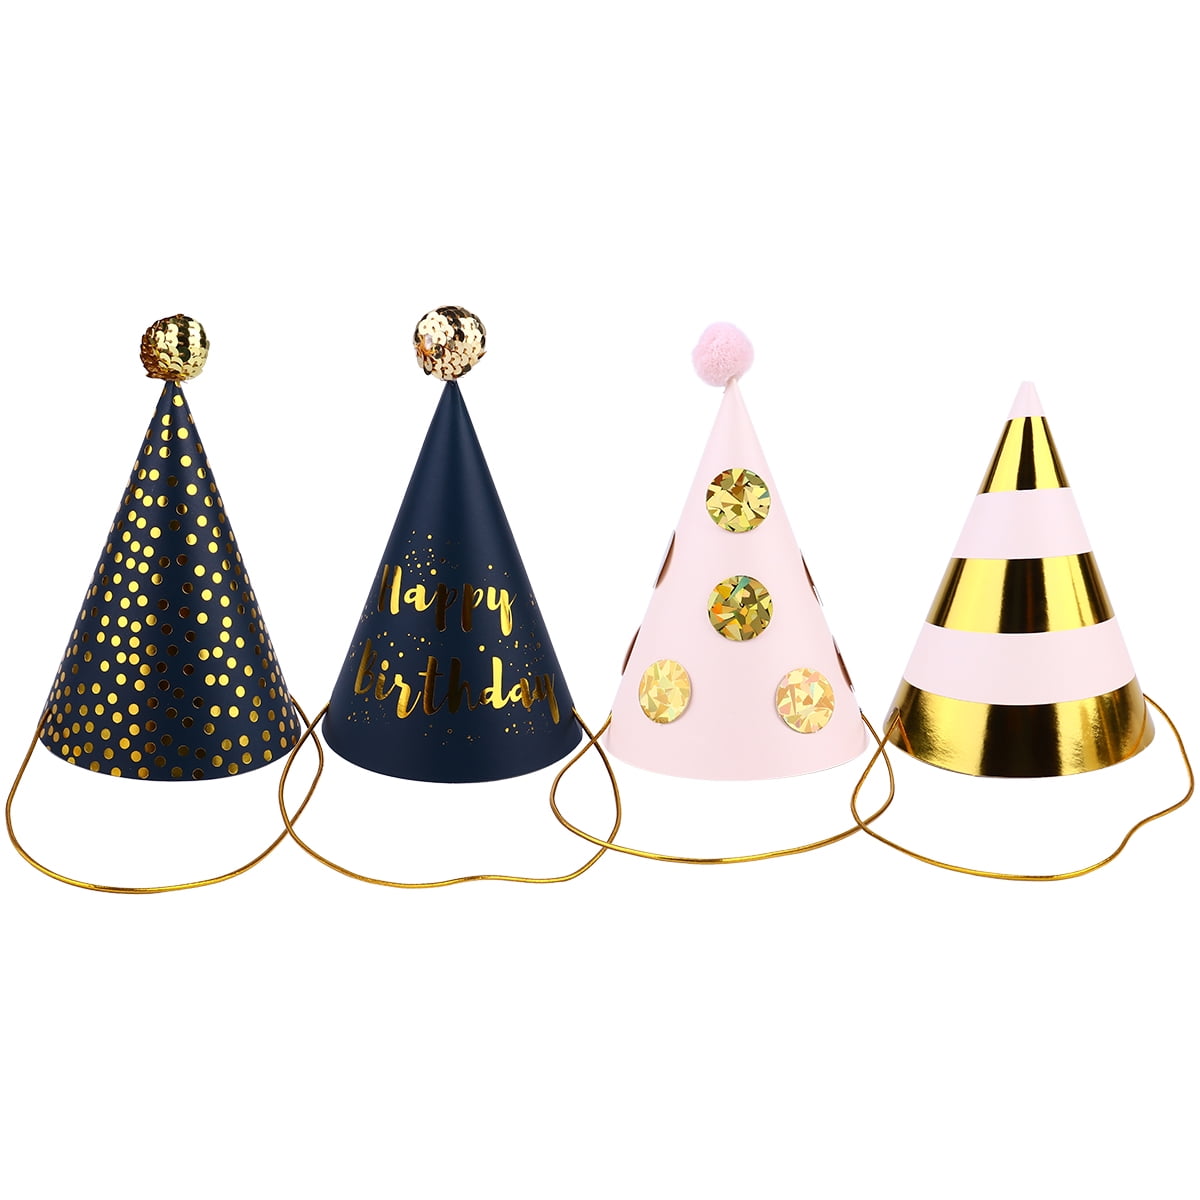 Golden TOYMYTOY King Princess Crown Party Hat for Kids Children Cosplay Costume Party 